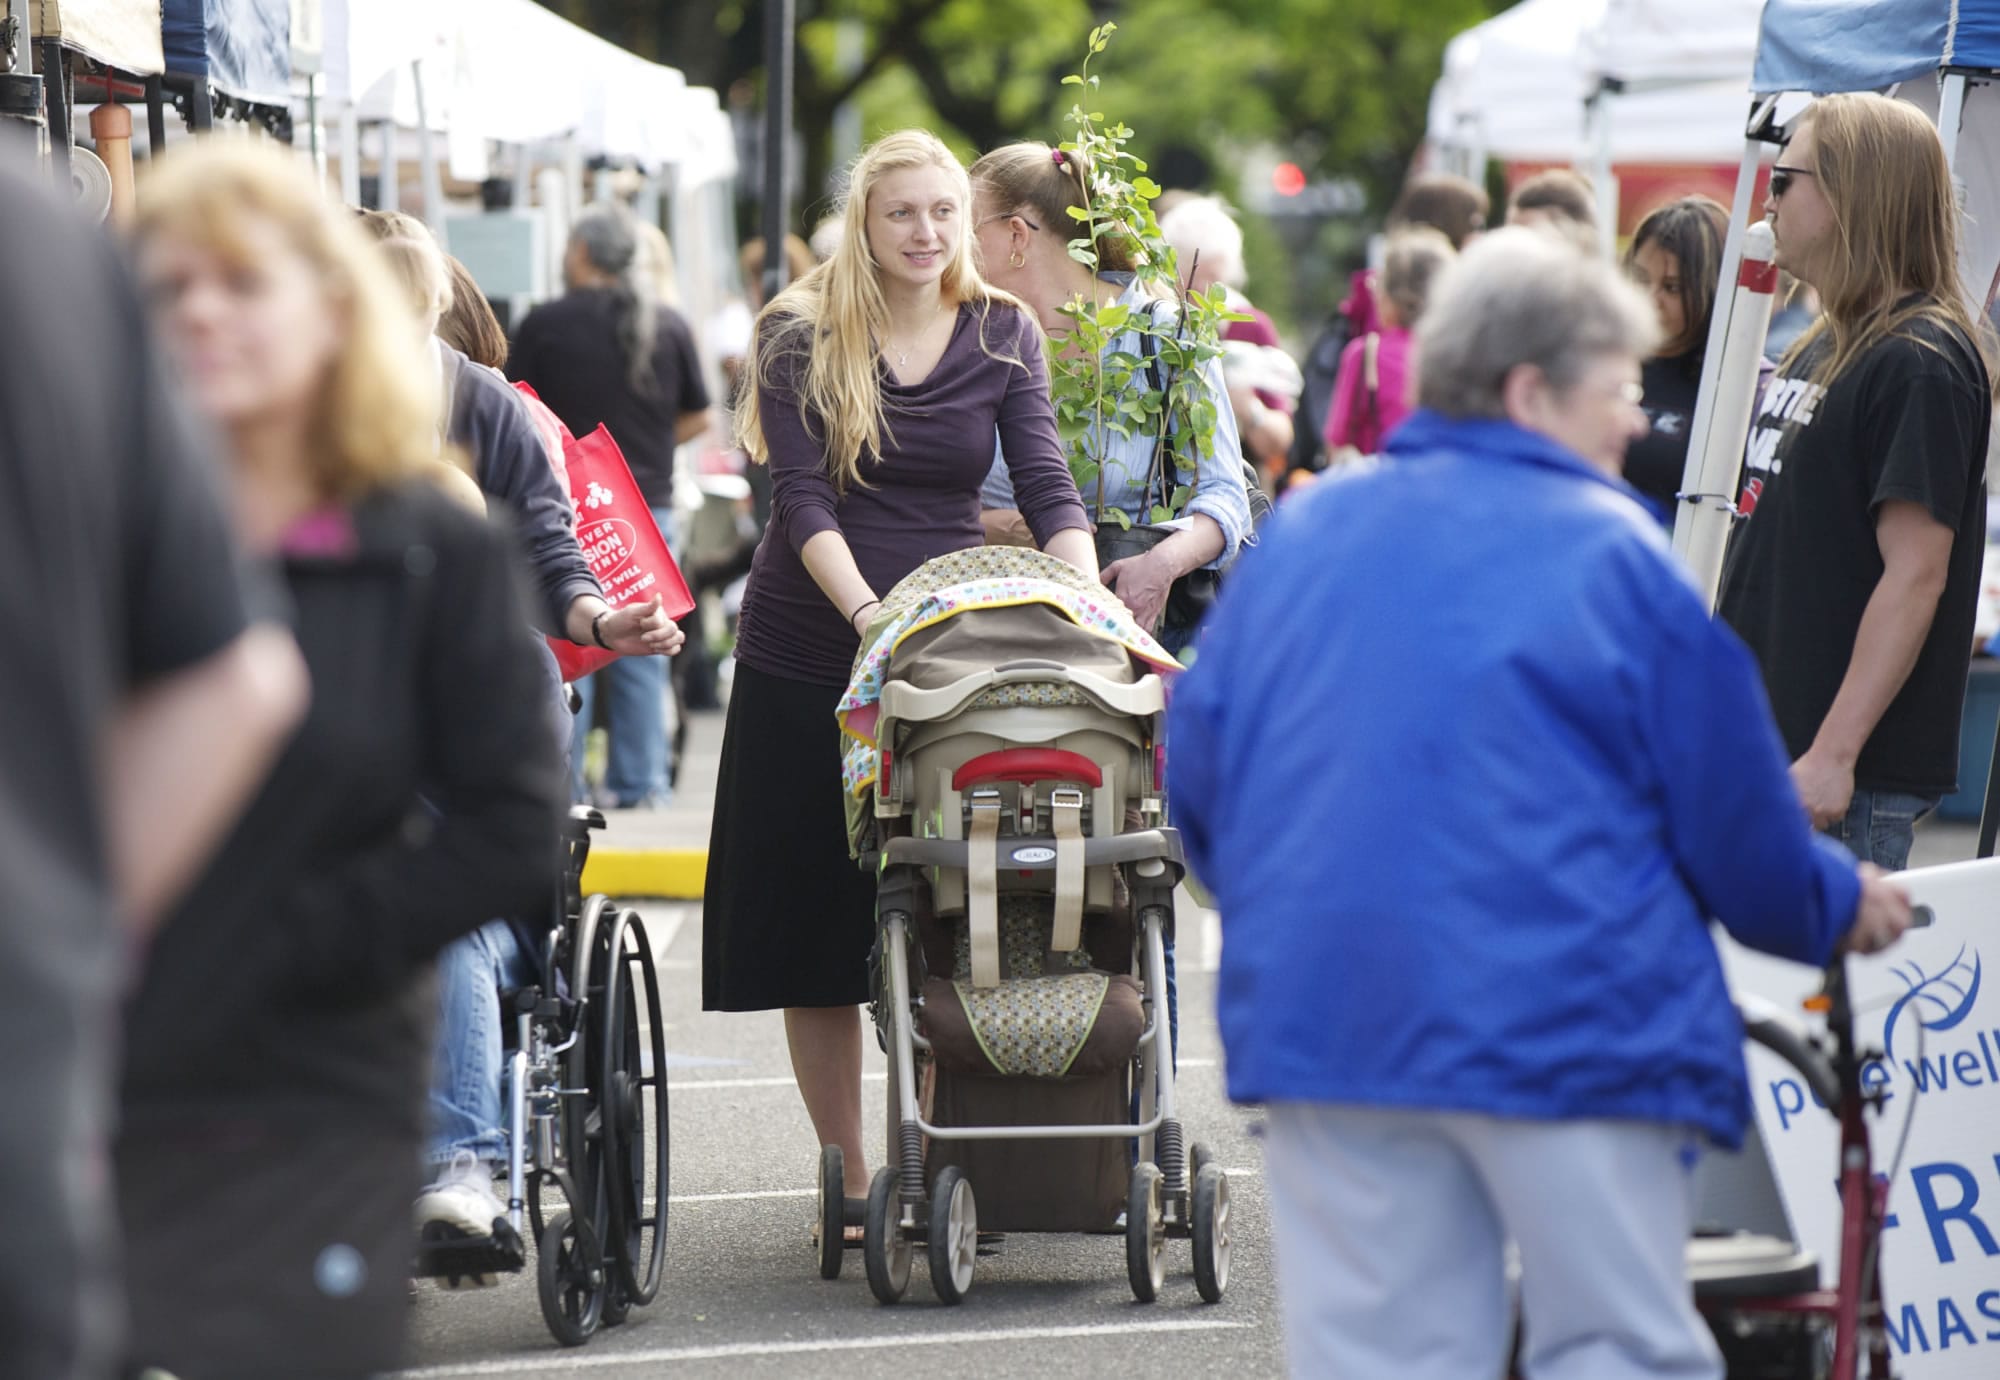 Jennifer Burian pushes her 7-day-old baby, Lara, in a stroller as she shops at the Camas Farmer's Market on Wednesday.